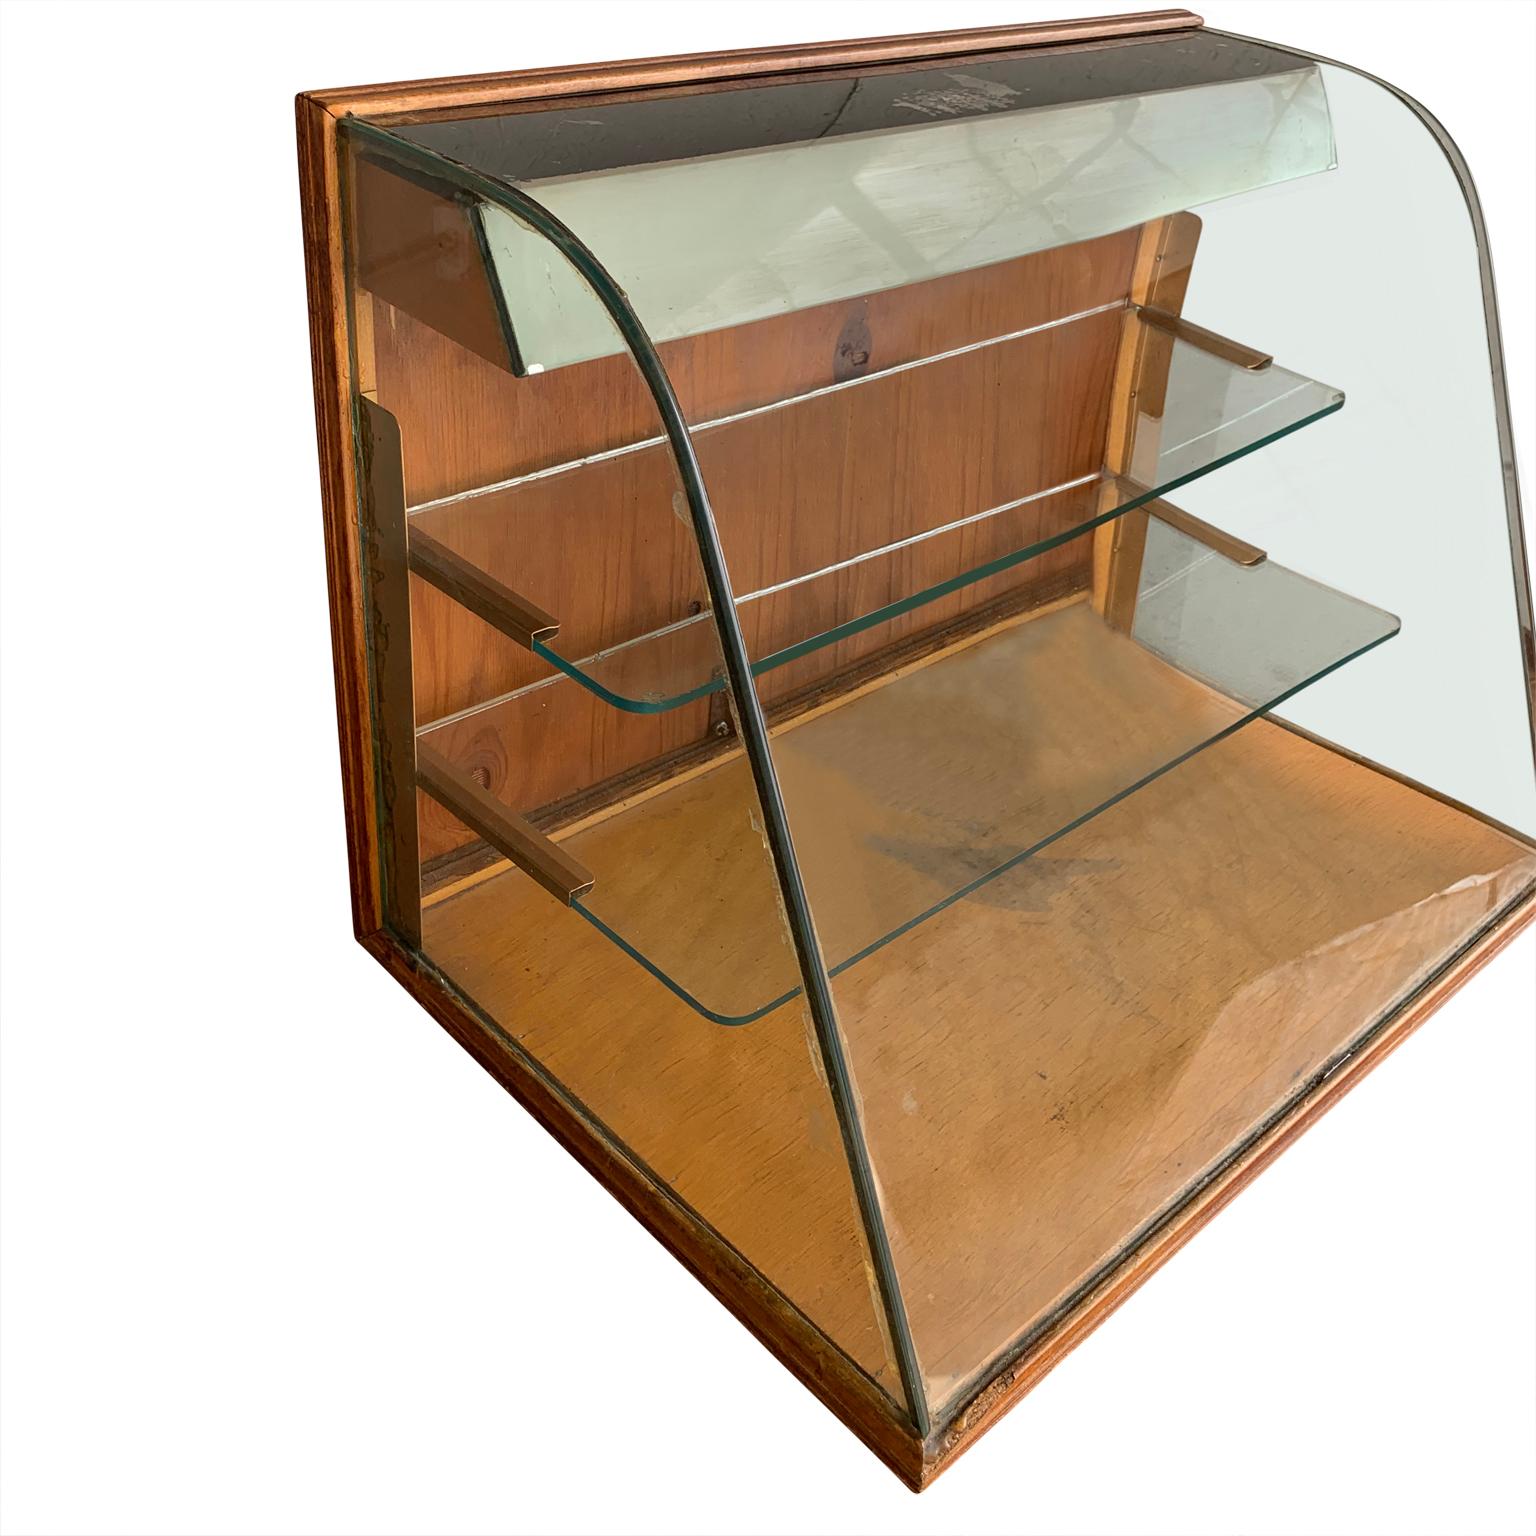 Small early American vintage two-tier tabletop shop display cabinet,
Marked 4215.
   